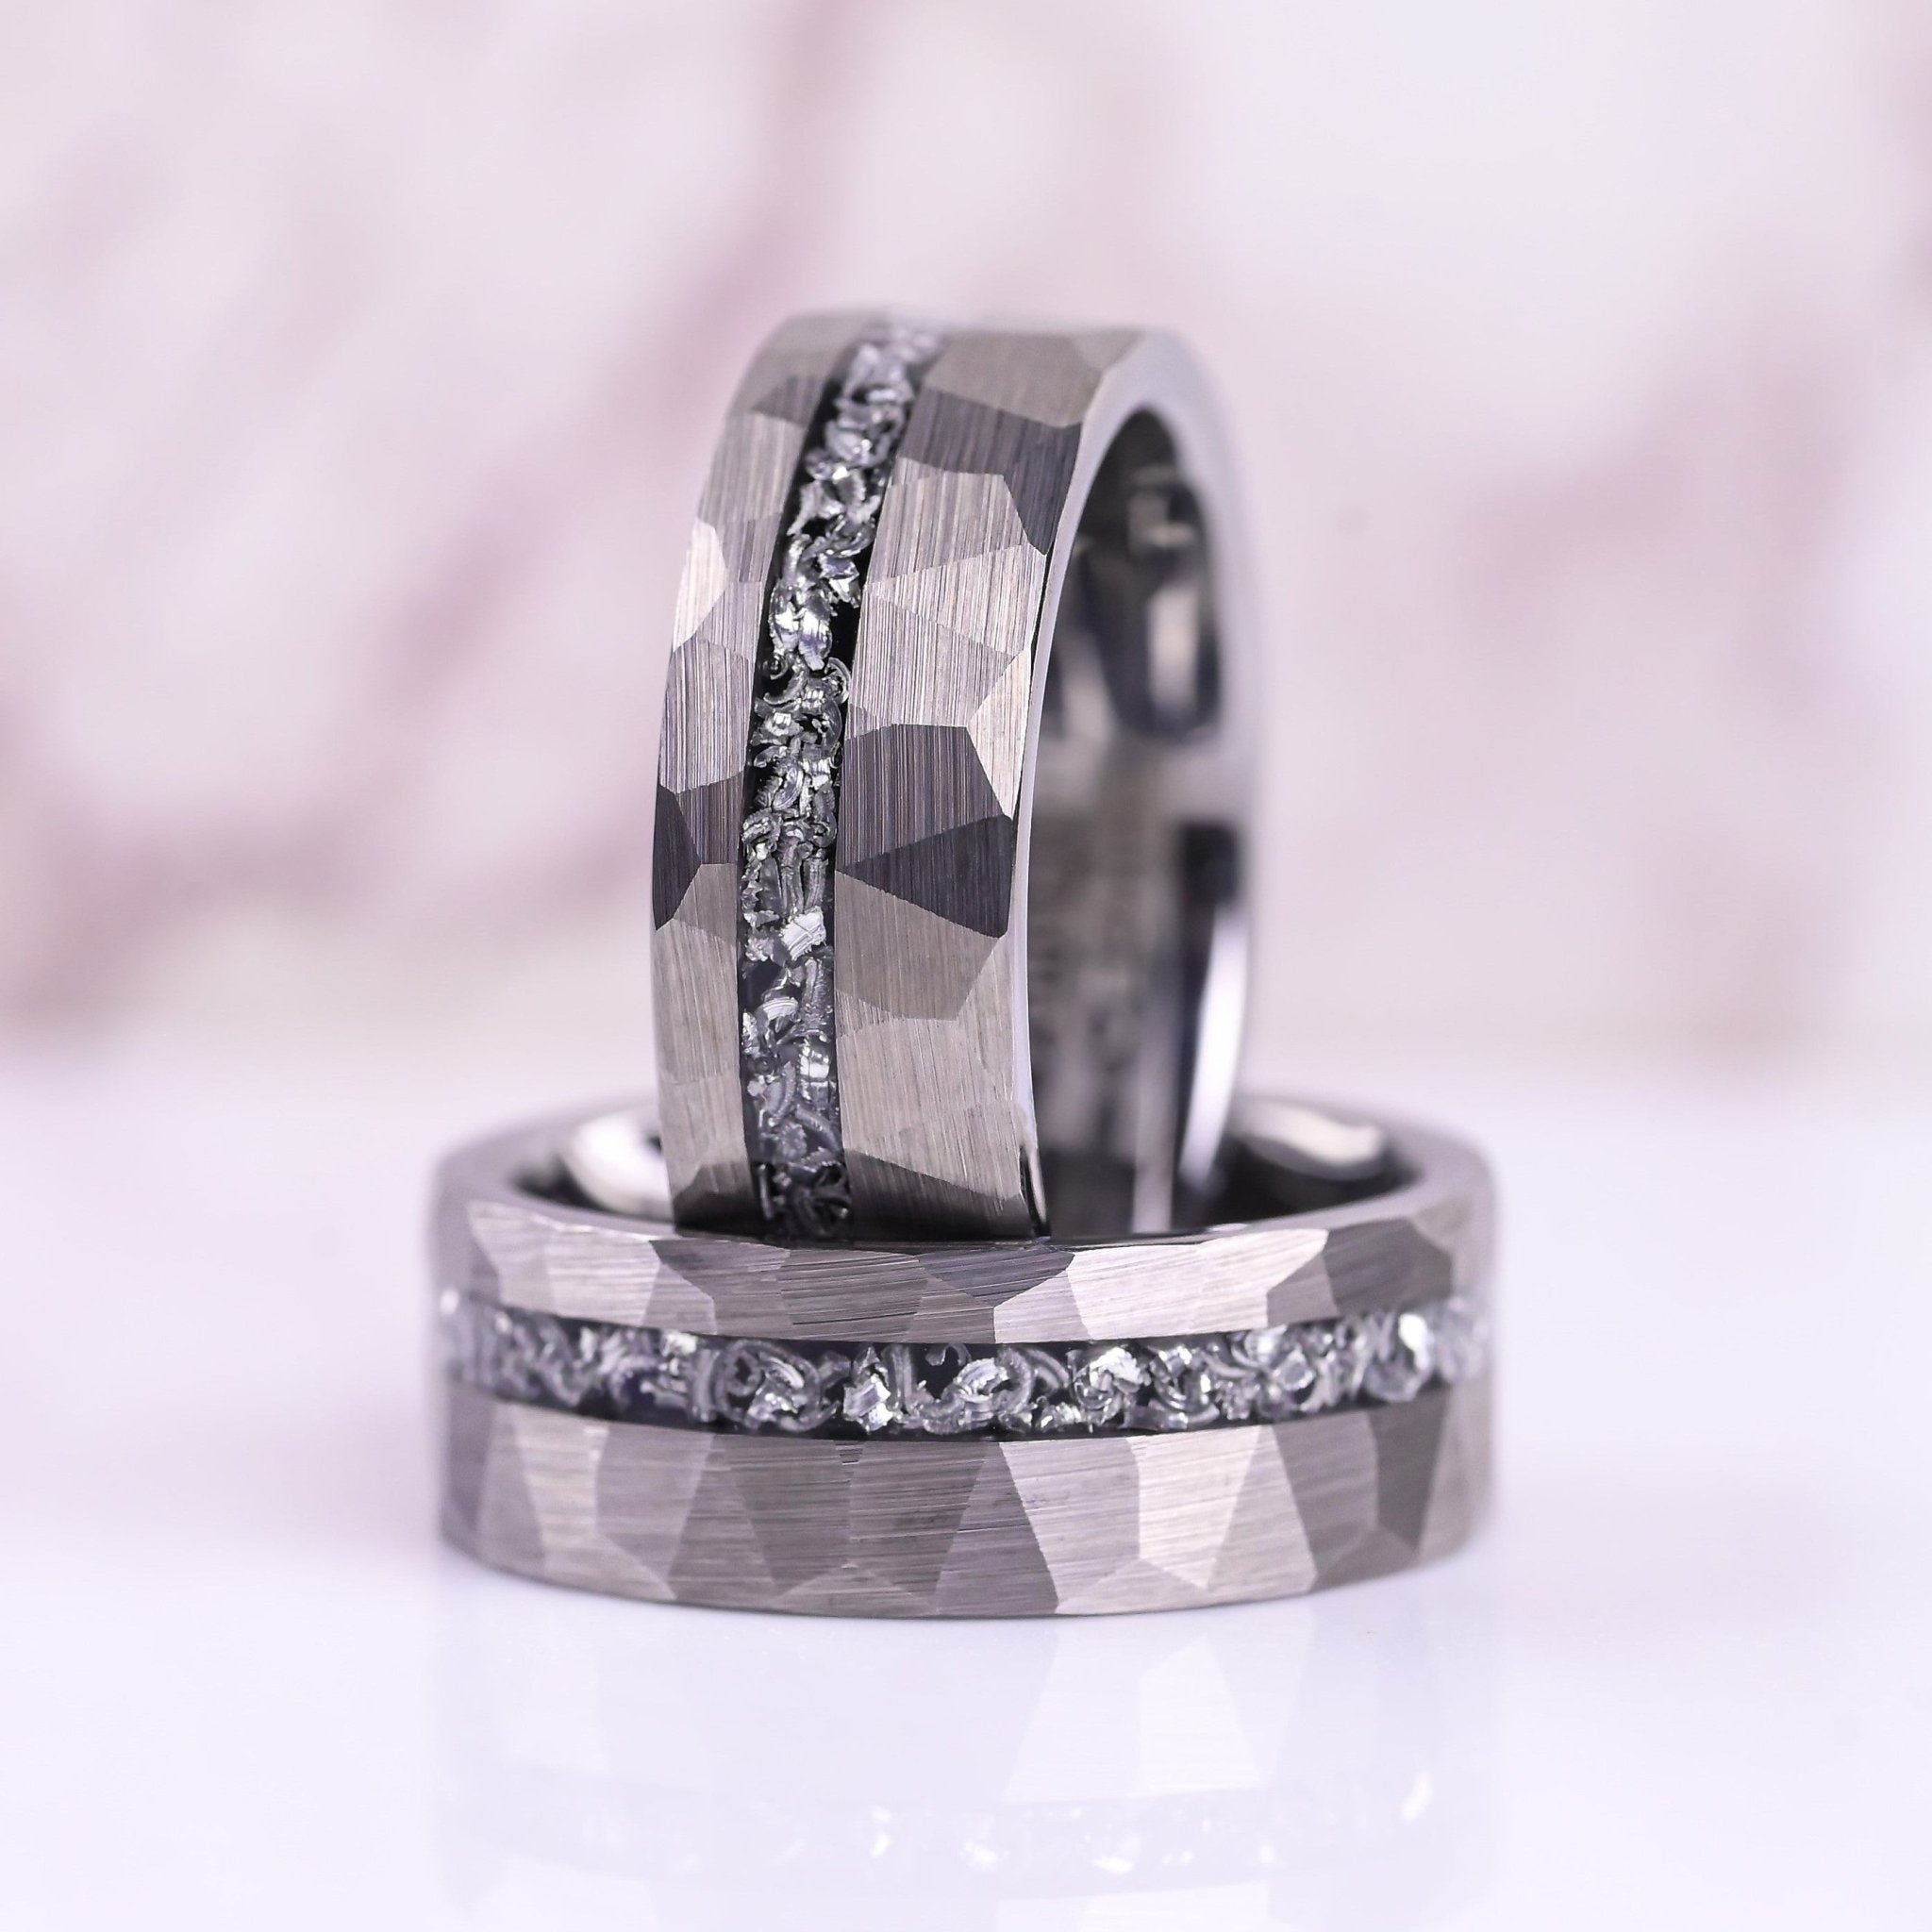 The Silversmith - Mens Wedding Band - Silver Hammered Tungsten Ring - Meteorite Inlay